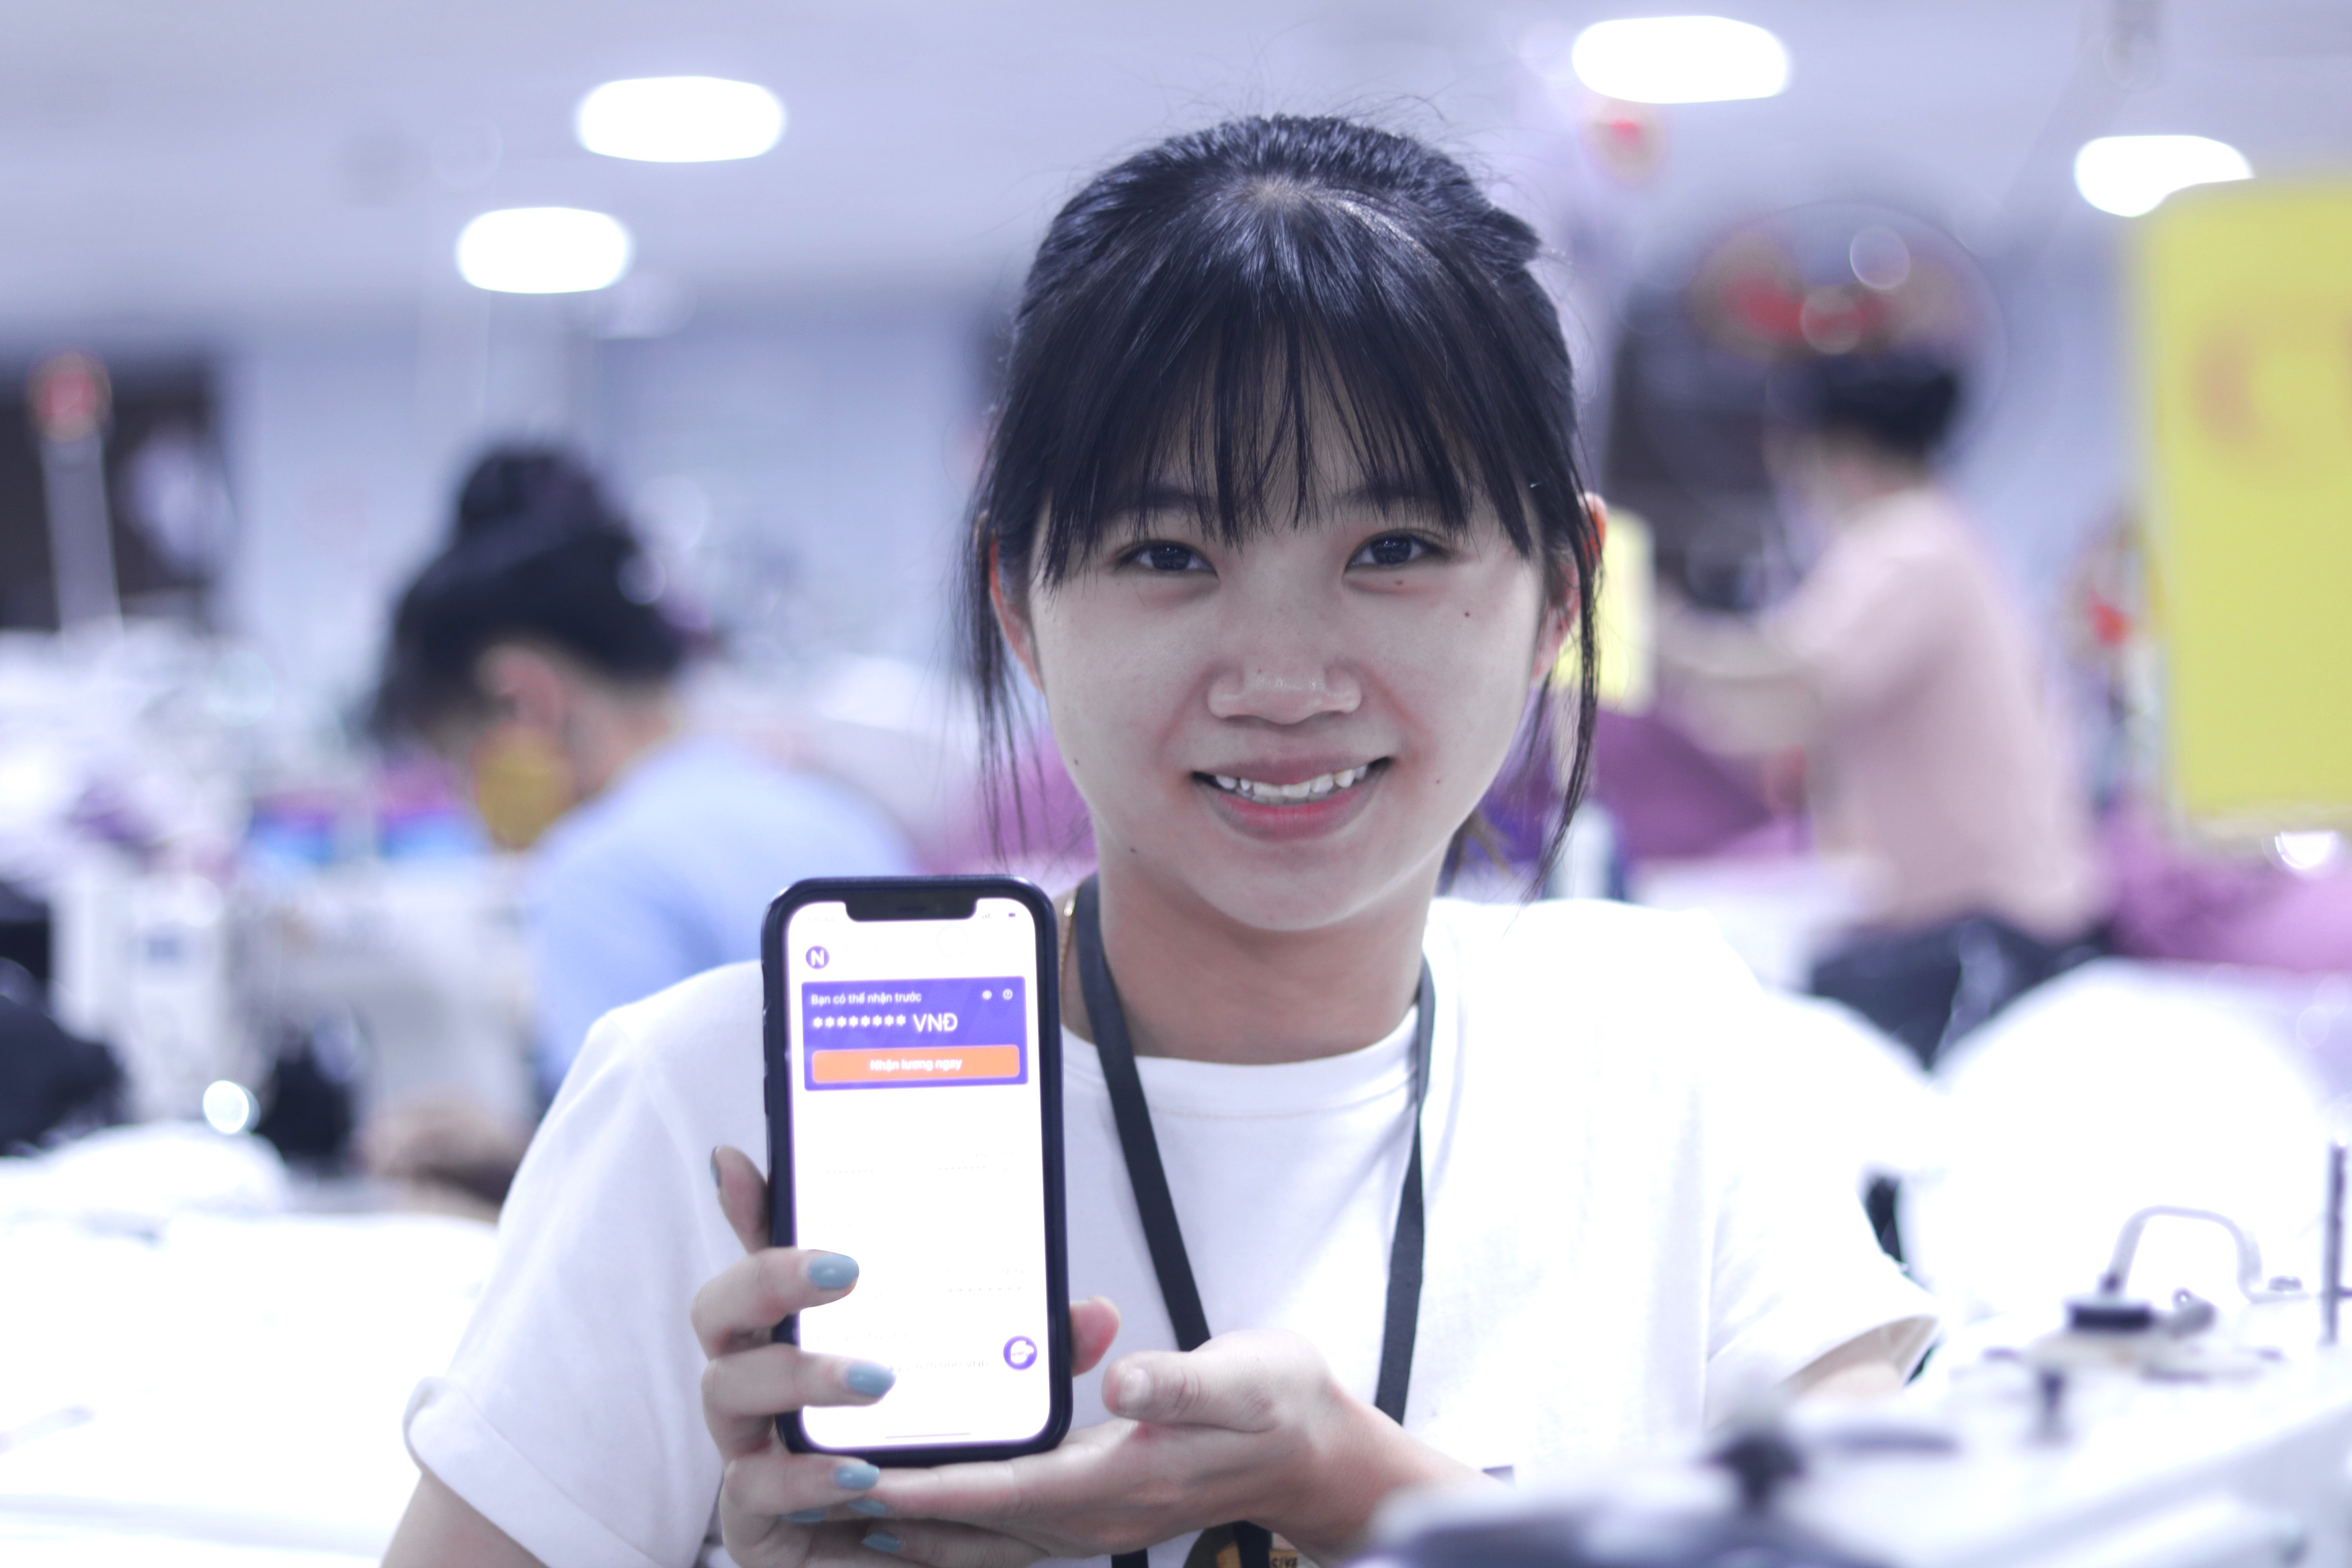 GIMO helps workers access a portion of their monthly earnings before payday via a mobile app.